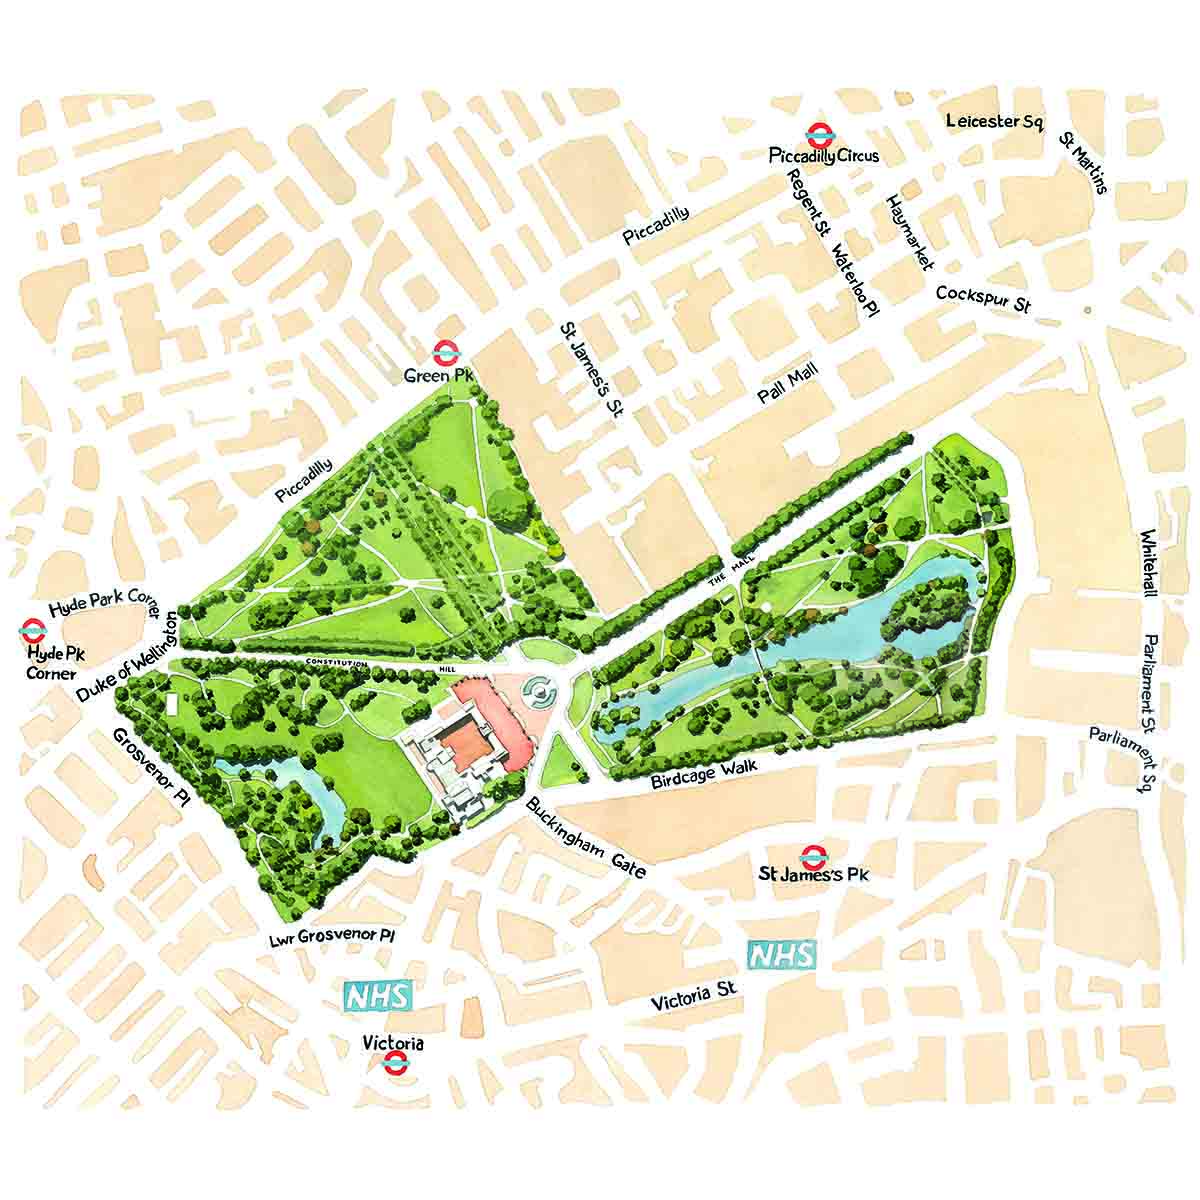 Plan view of St James' Park in London. illustration map of St James’s Park London